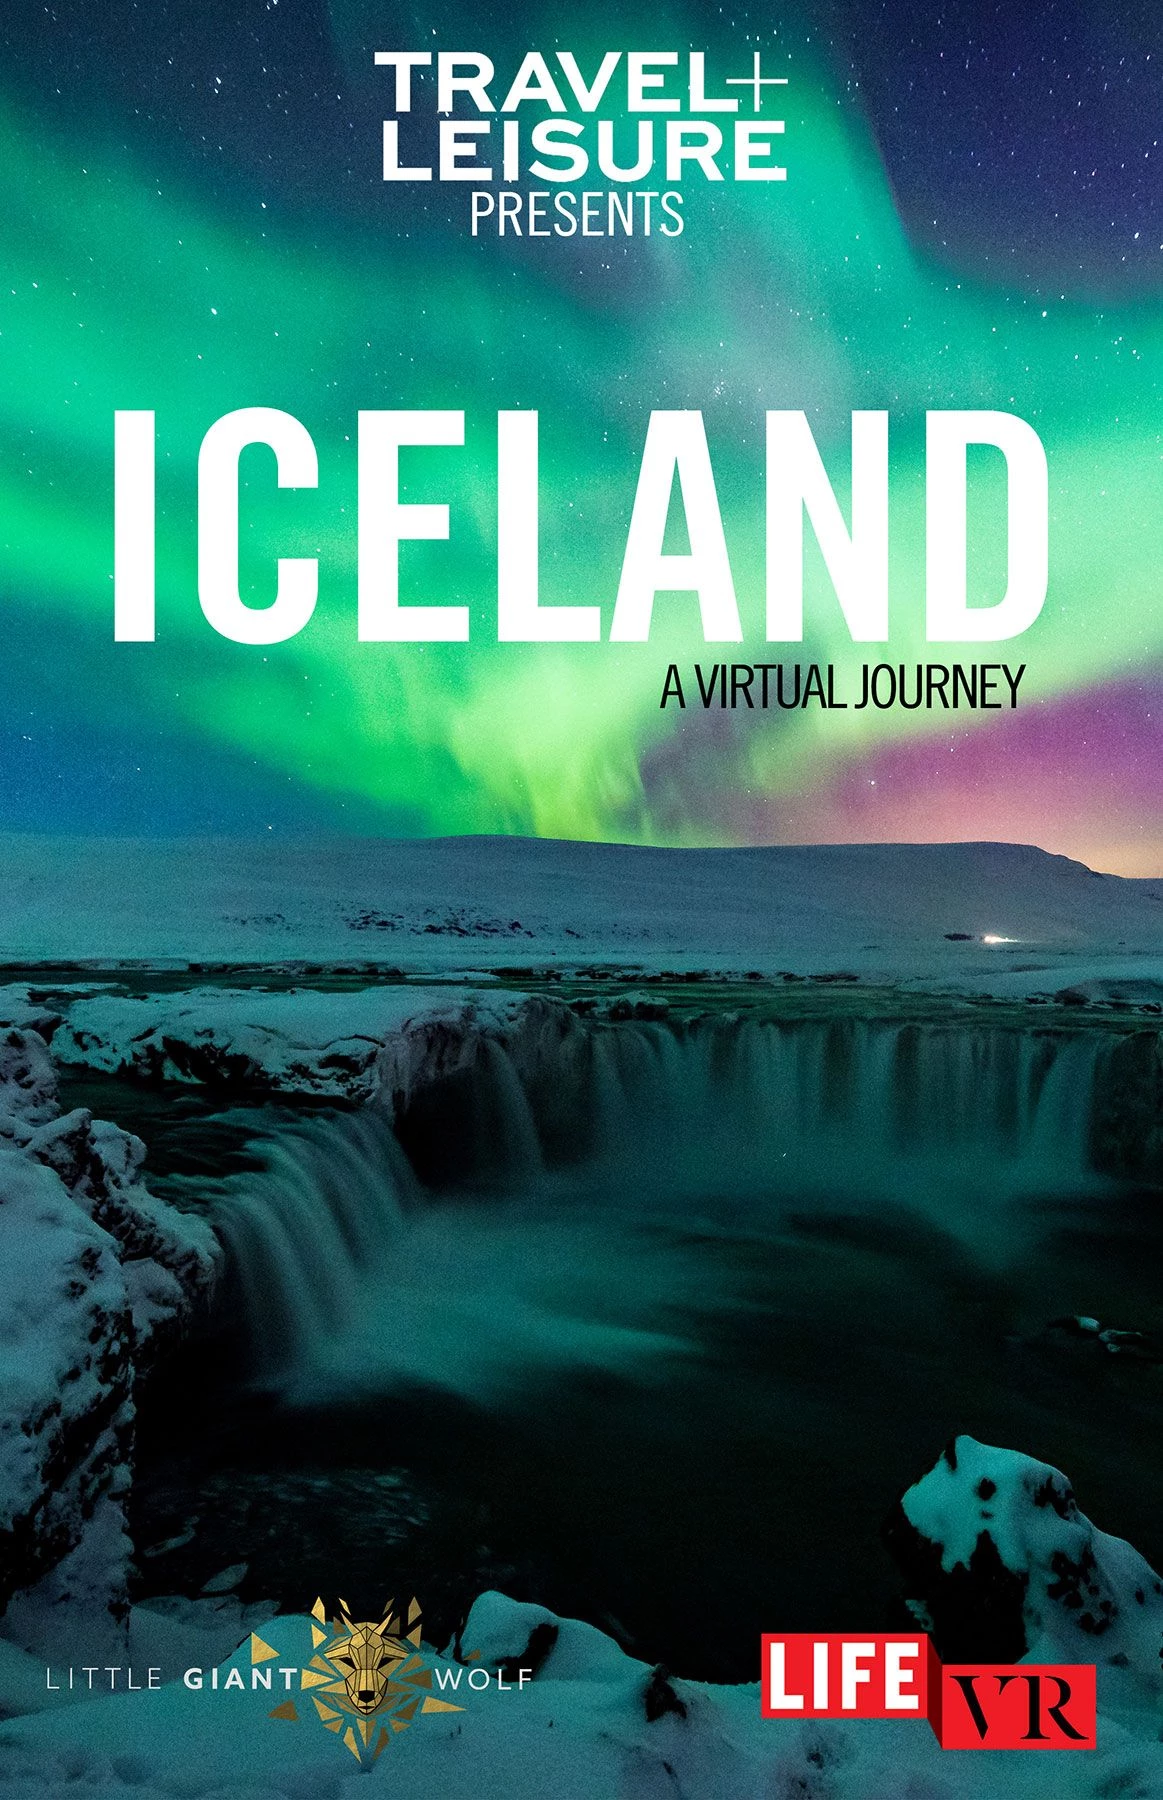 ICELAND: A VIRTUAL JOURNEY